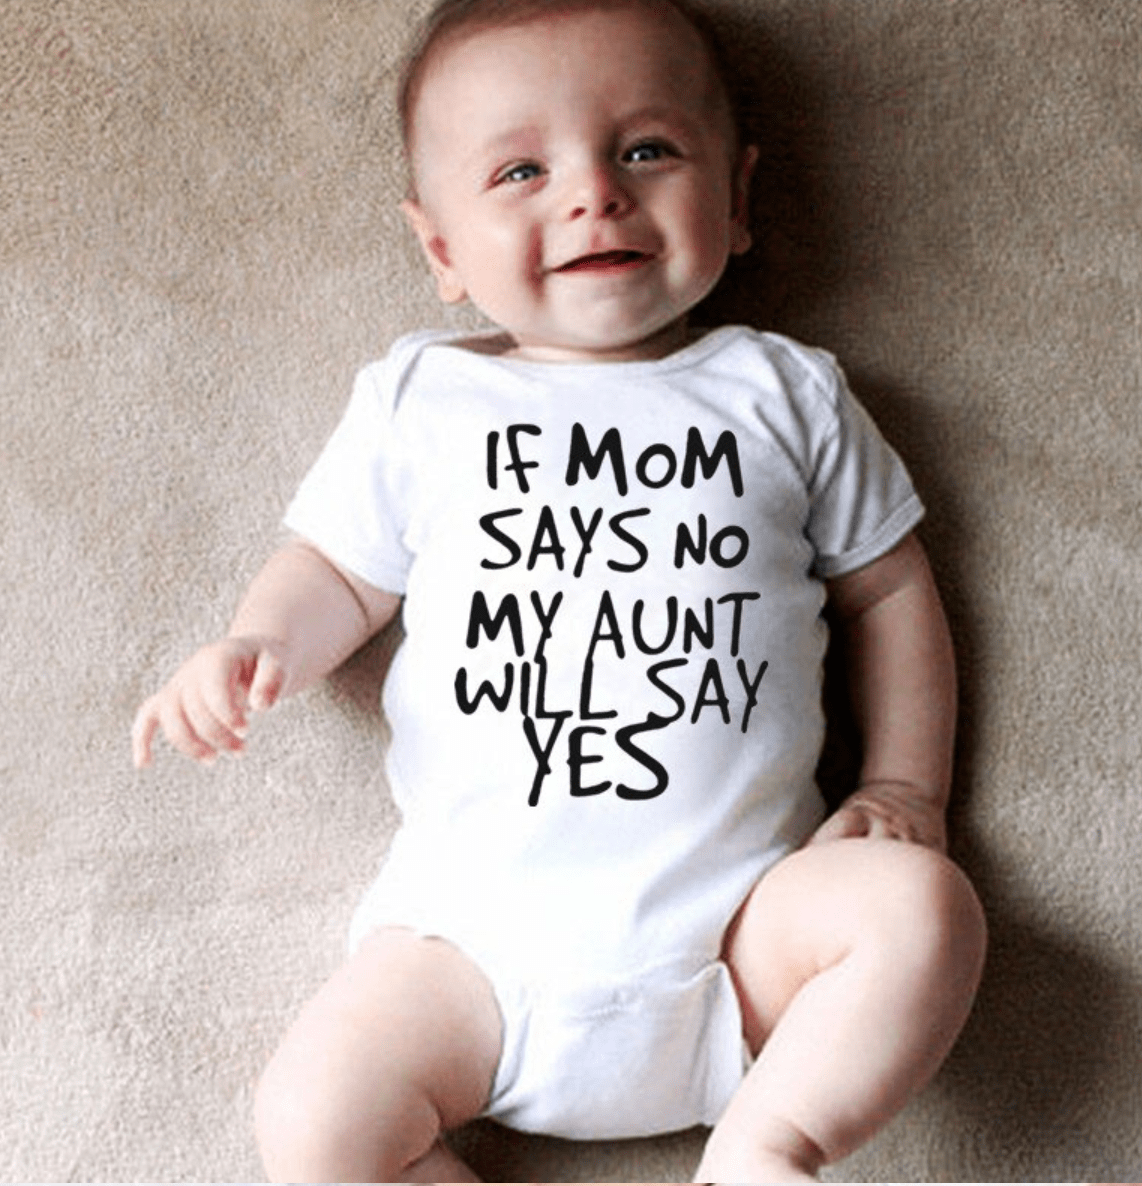 IF MOM SAYS NO MY AUNT WILL SAY YES Cotton Infant Baby Romper is as comfortable as it is cute.  Made with 100% cotton, it is soft, breathable, sweat-absorbent, and easy to wash.